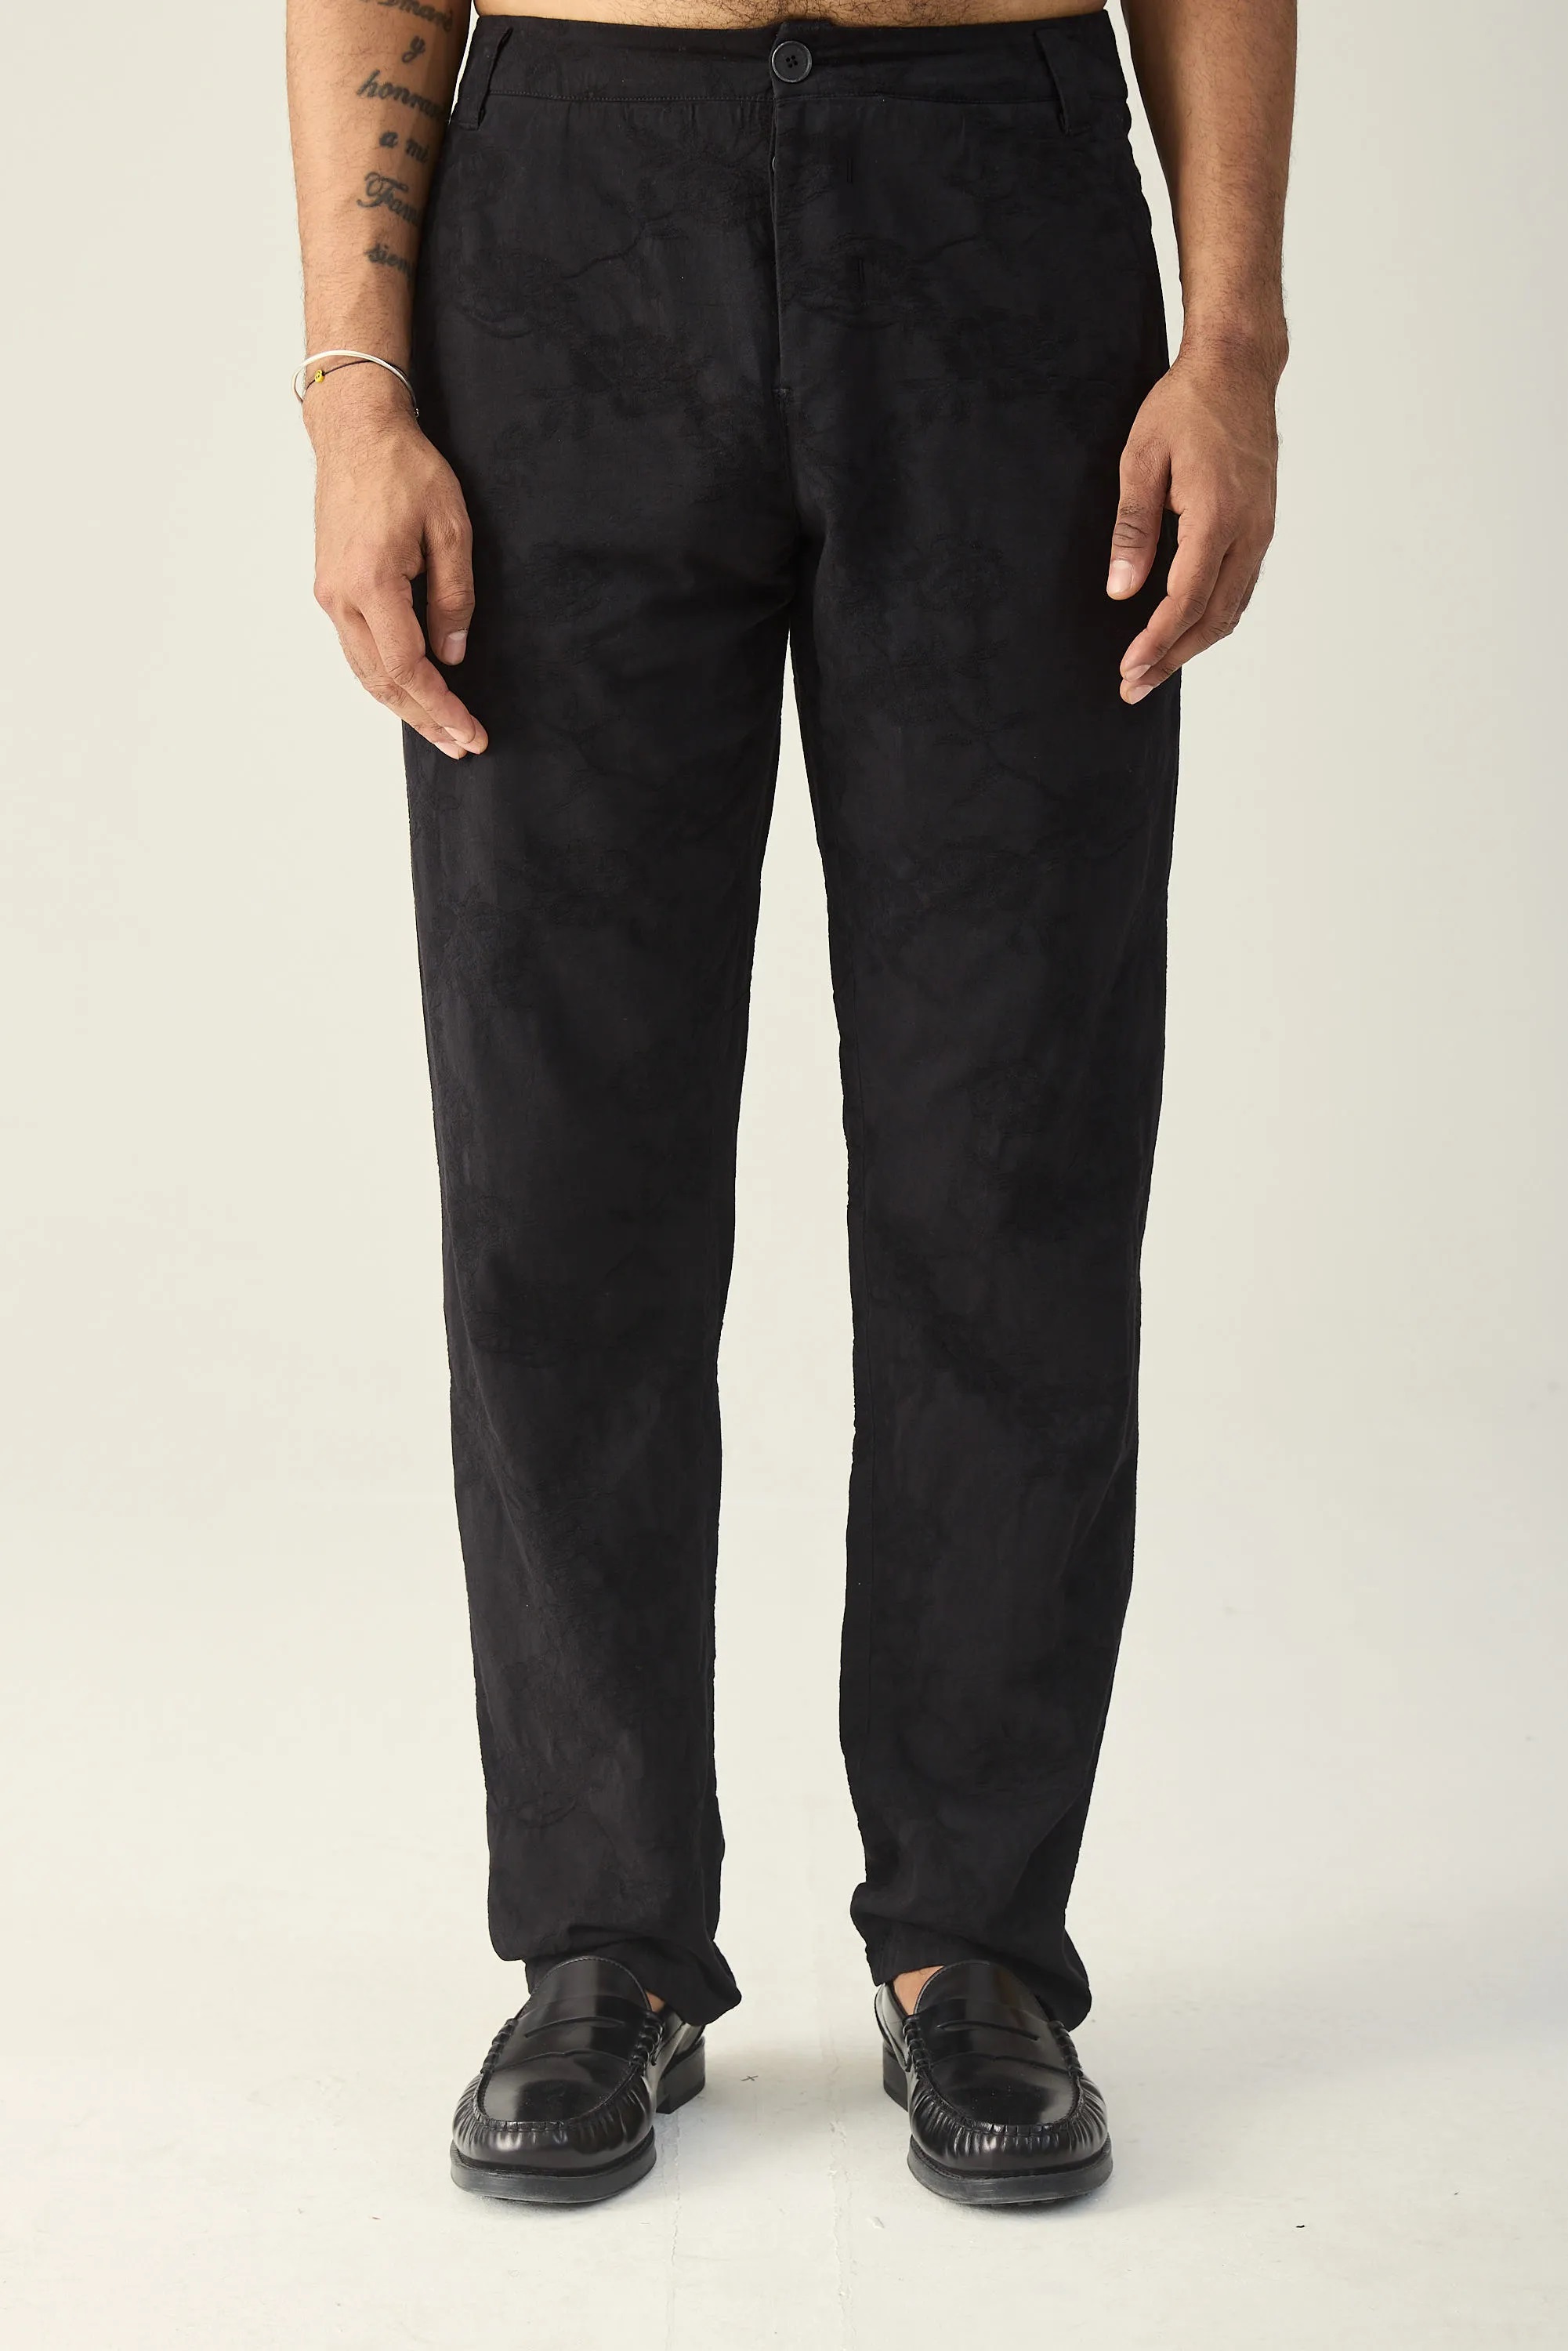 HANNIBAL. Embroidered Trouser Hannes in Black 50